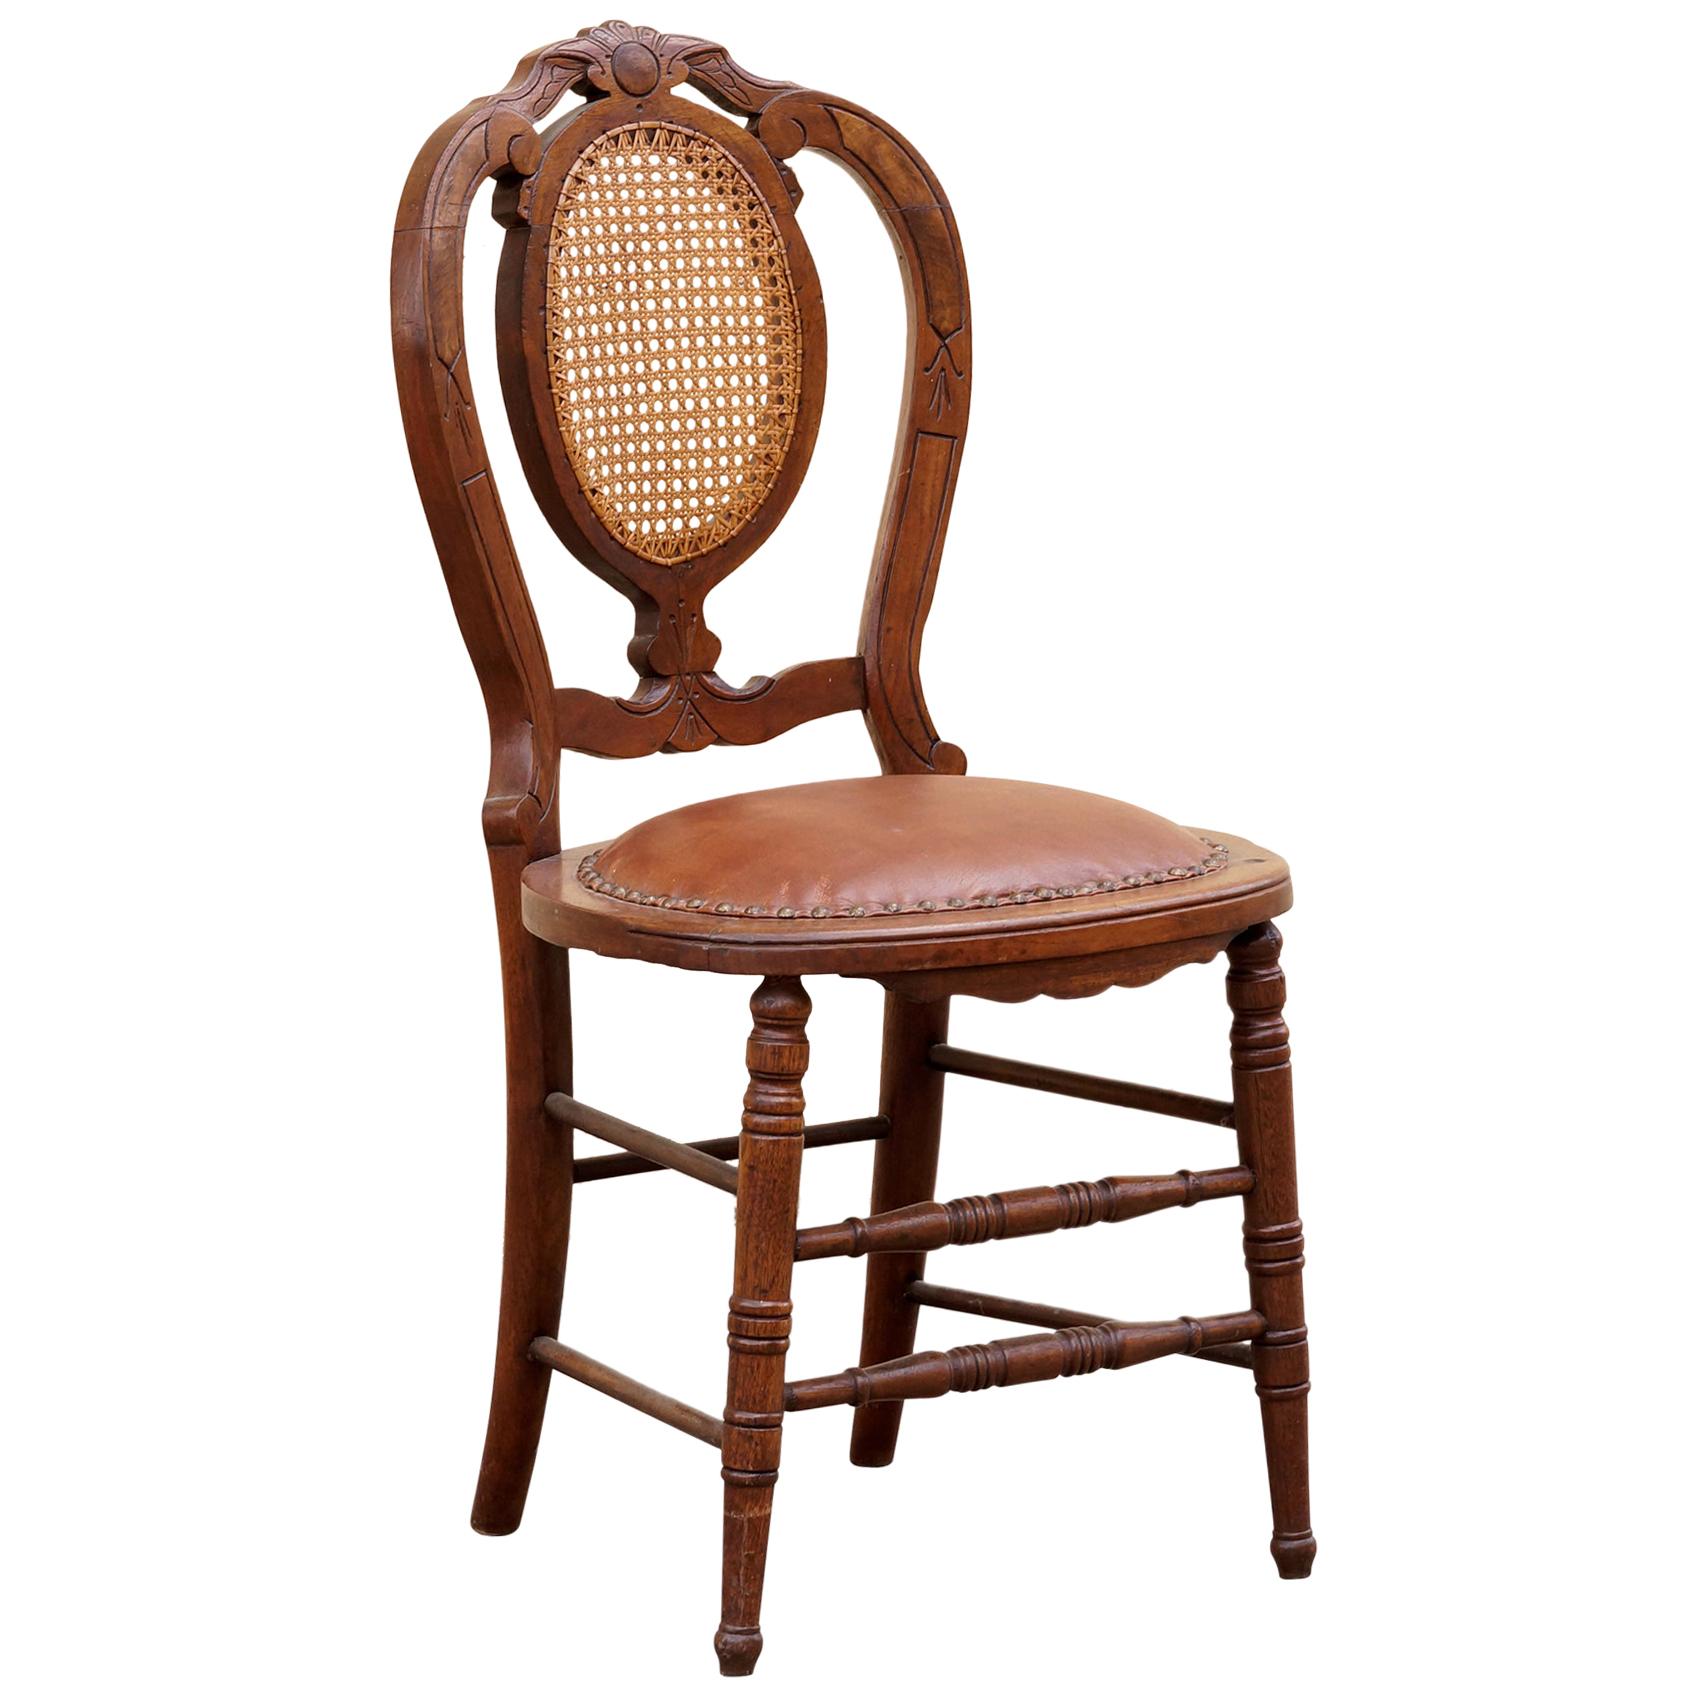 Antique Victorian Side Chair with Cane Back